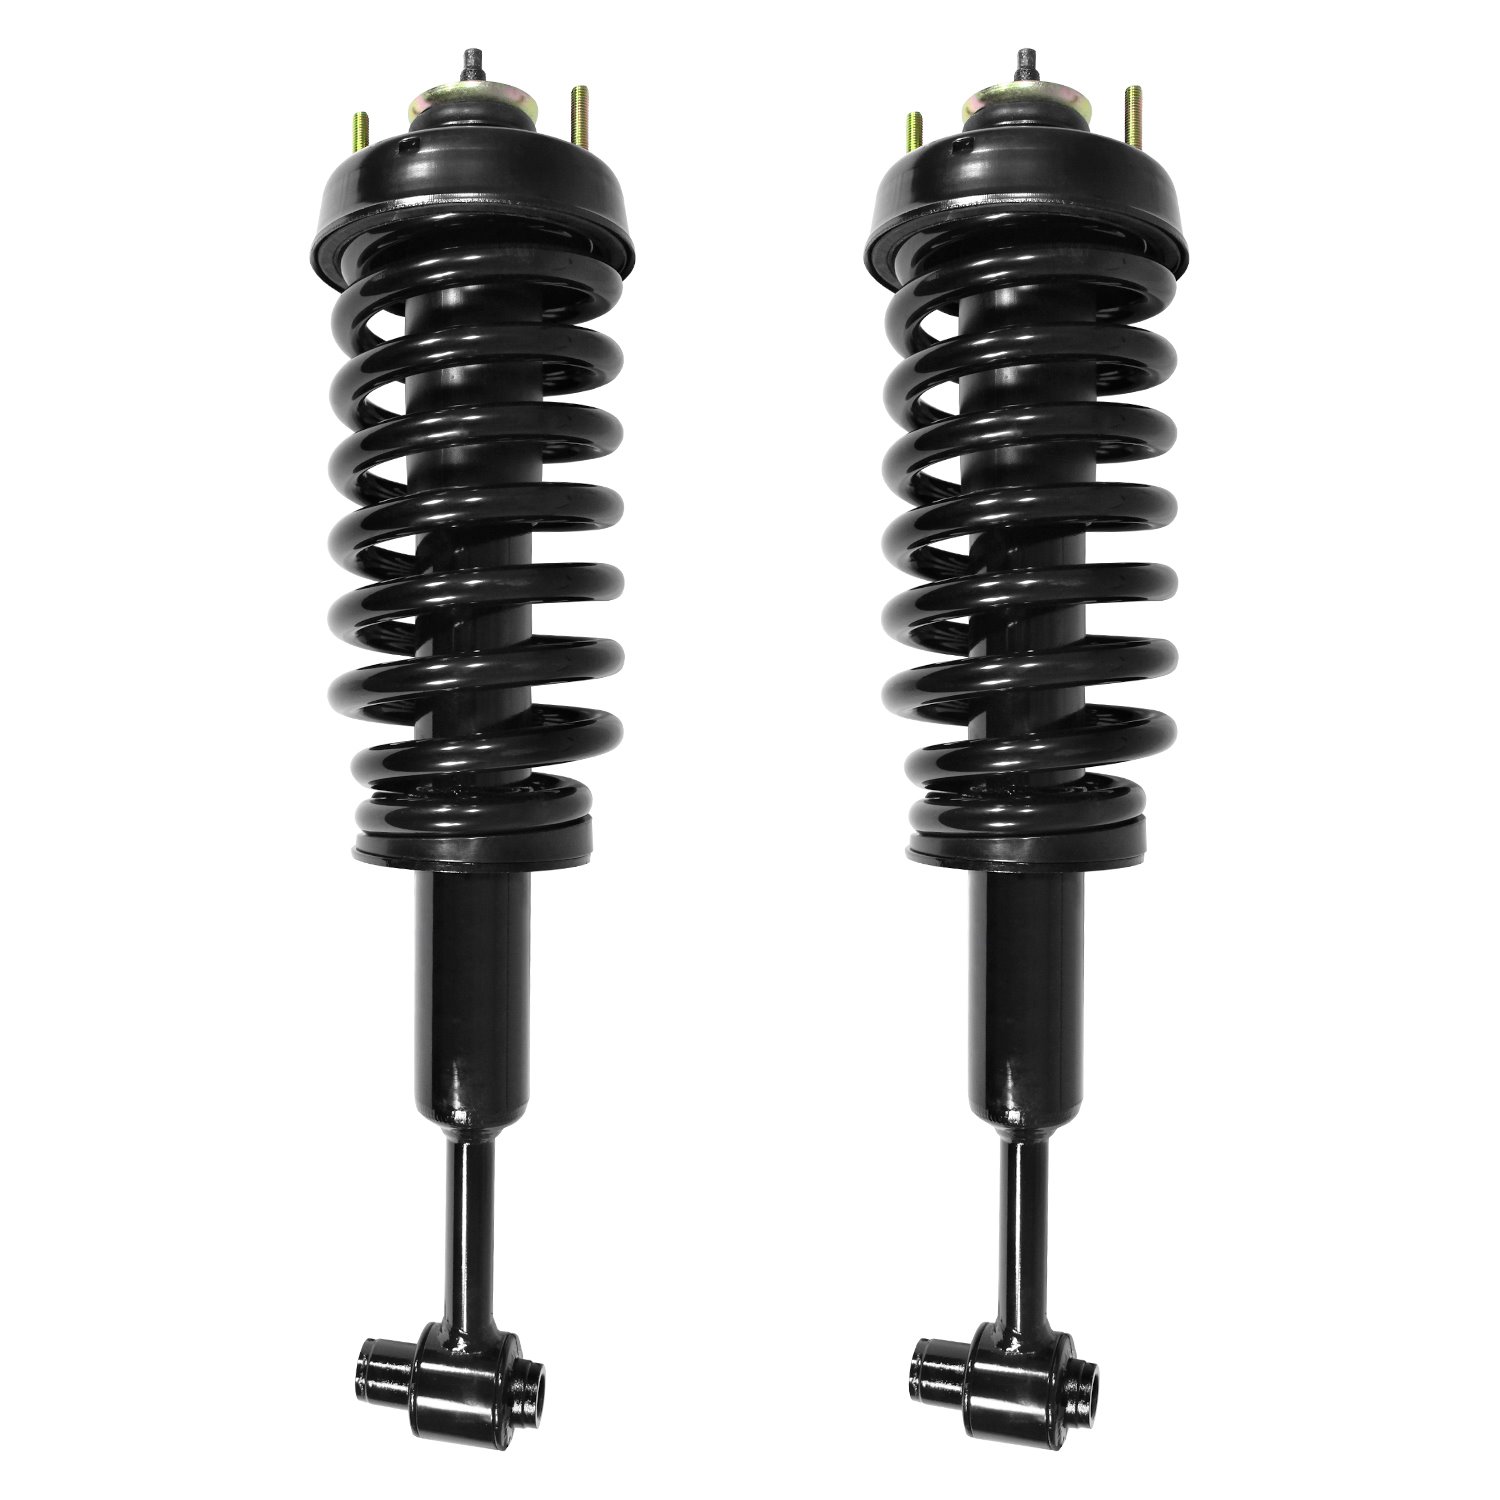 2-11160-001 Suspension Strut & Coil Spring Assembly Set Fits Select Ford Explorer, Mercury Mountaineer